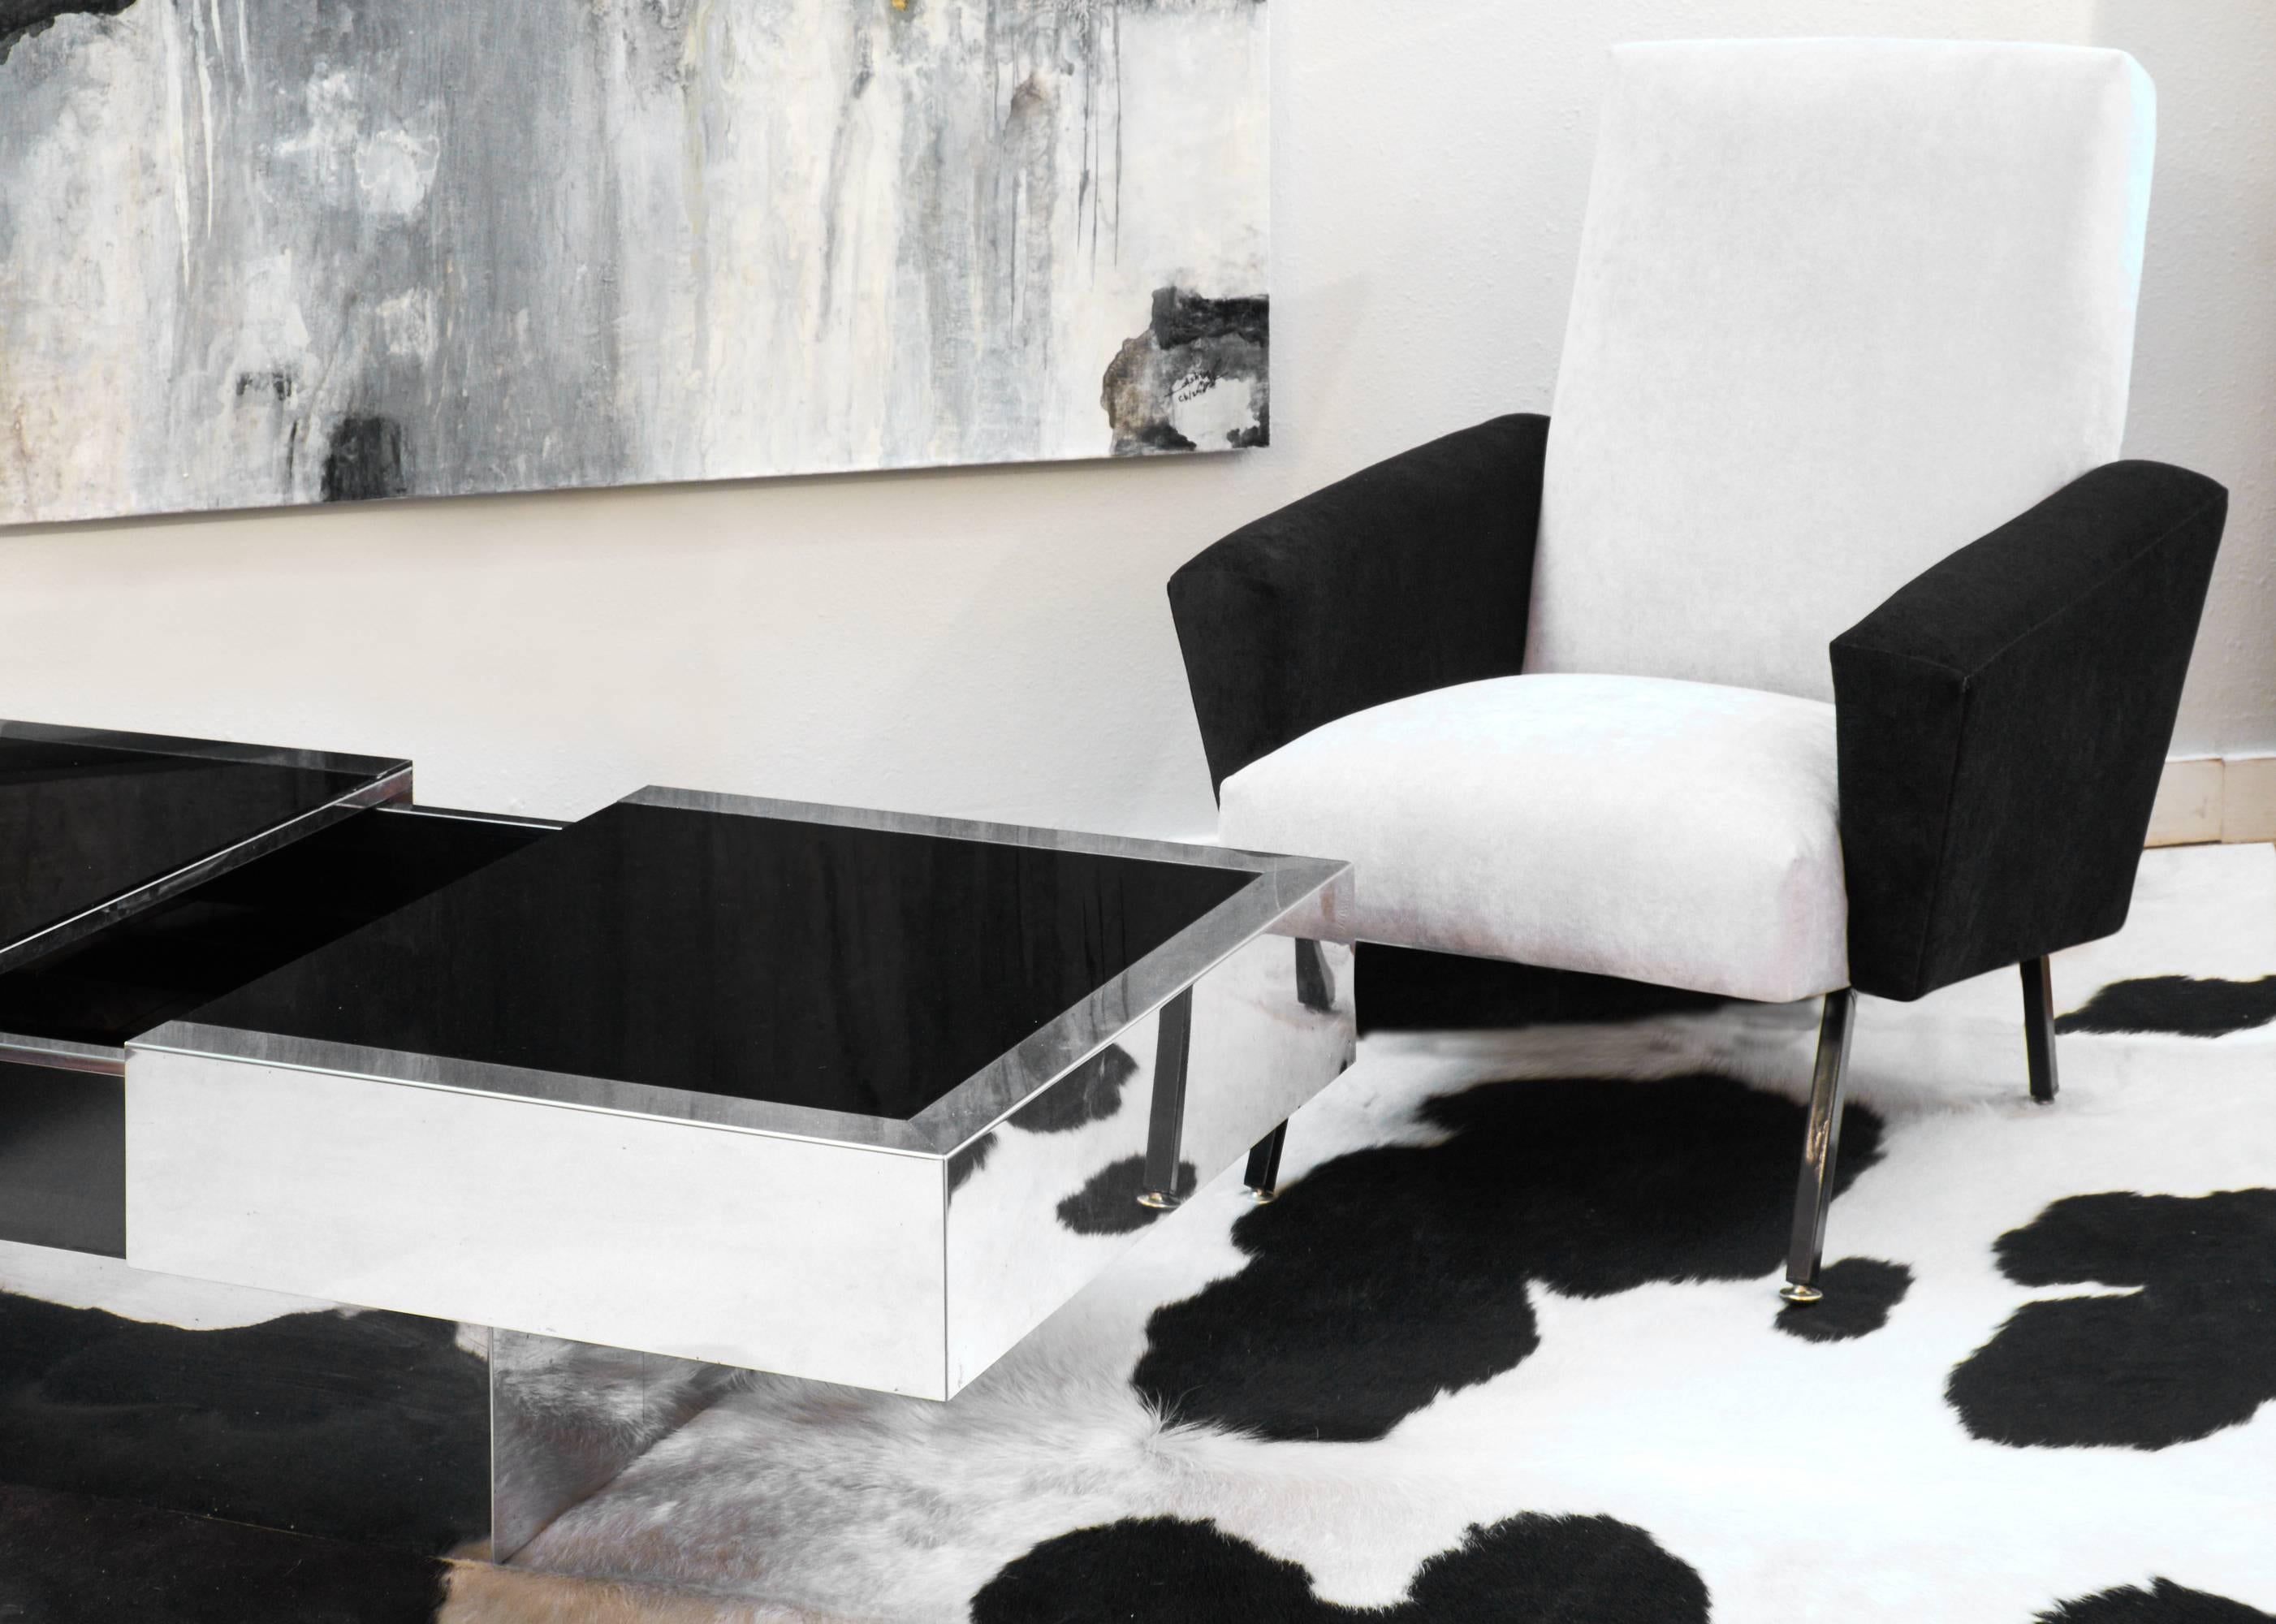 Italian vintage coffee table designed by Willy Rizzo for Cidue. Steel frame and base with black glass sliding top, which extends to reveal an interior compartment. An iconic dry bar cocktail table.
 